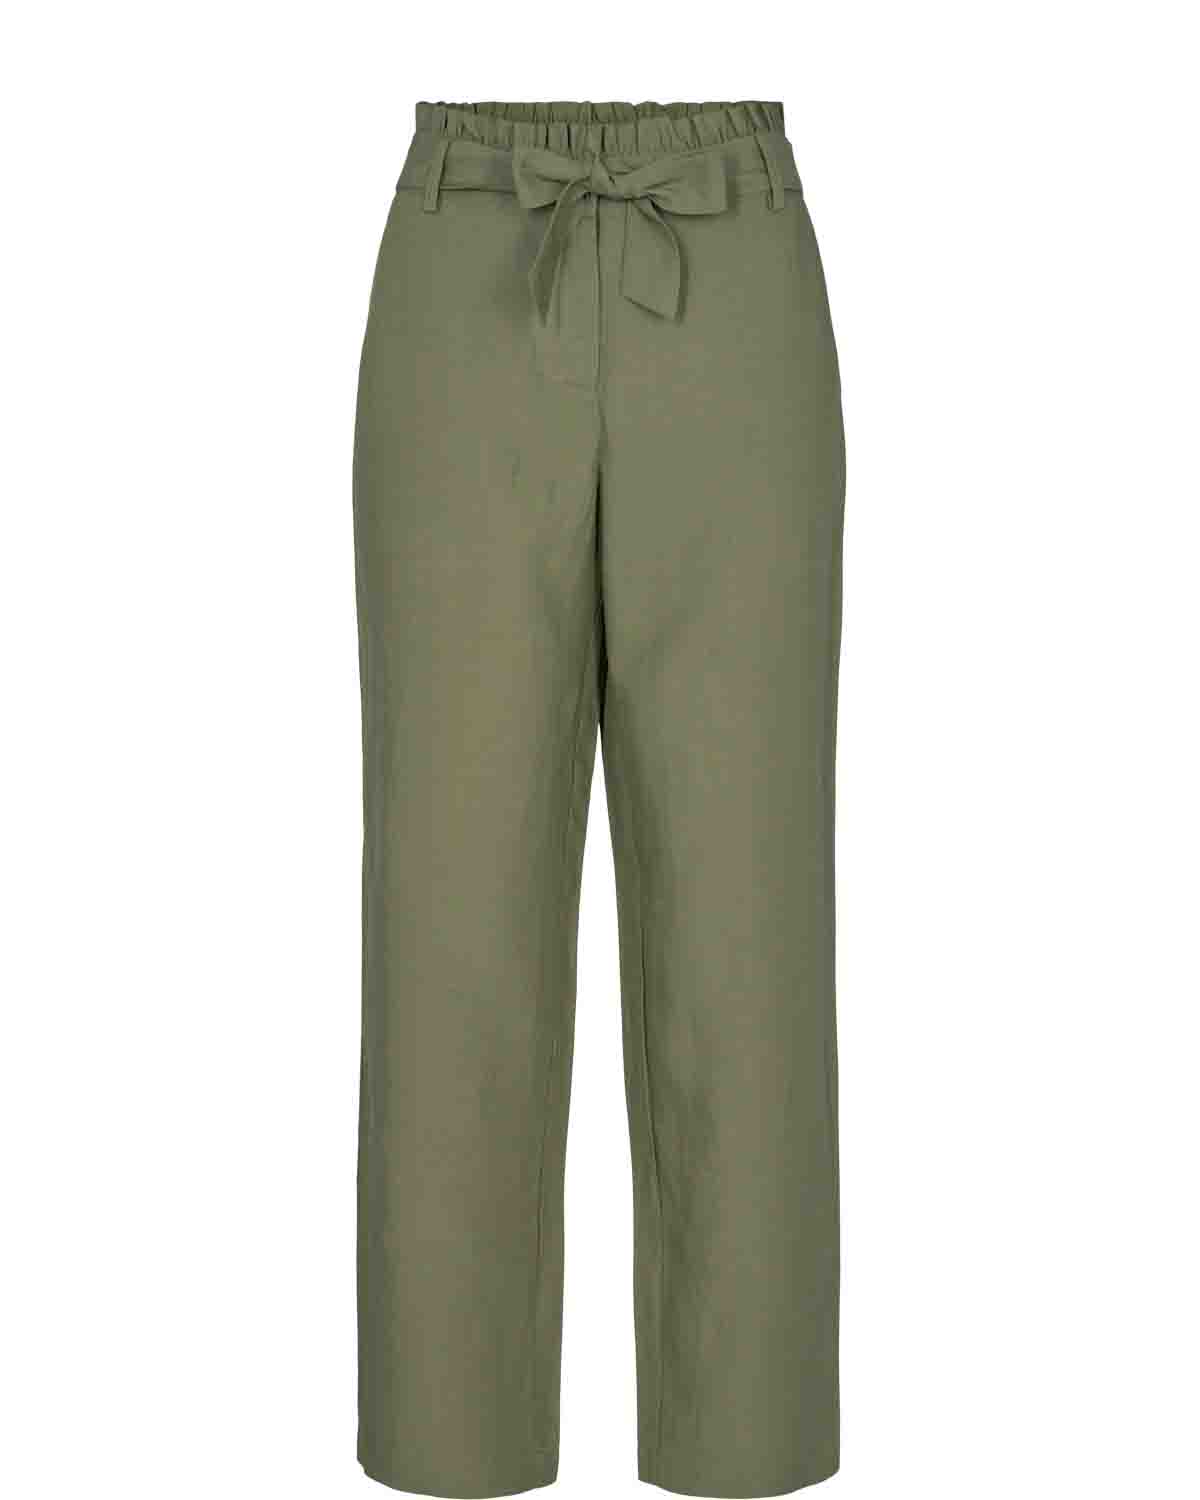 Nuchabely green trousers